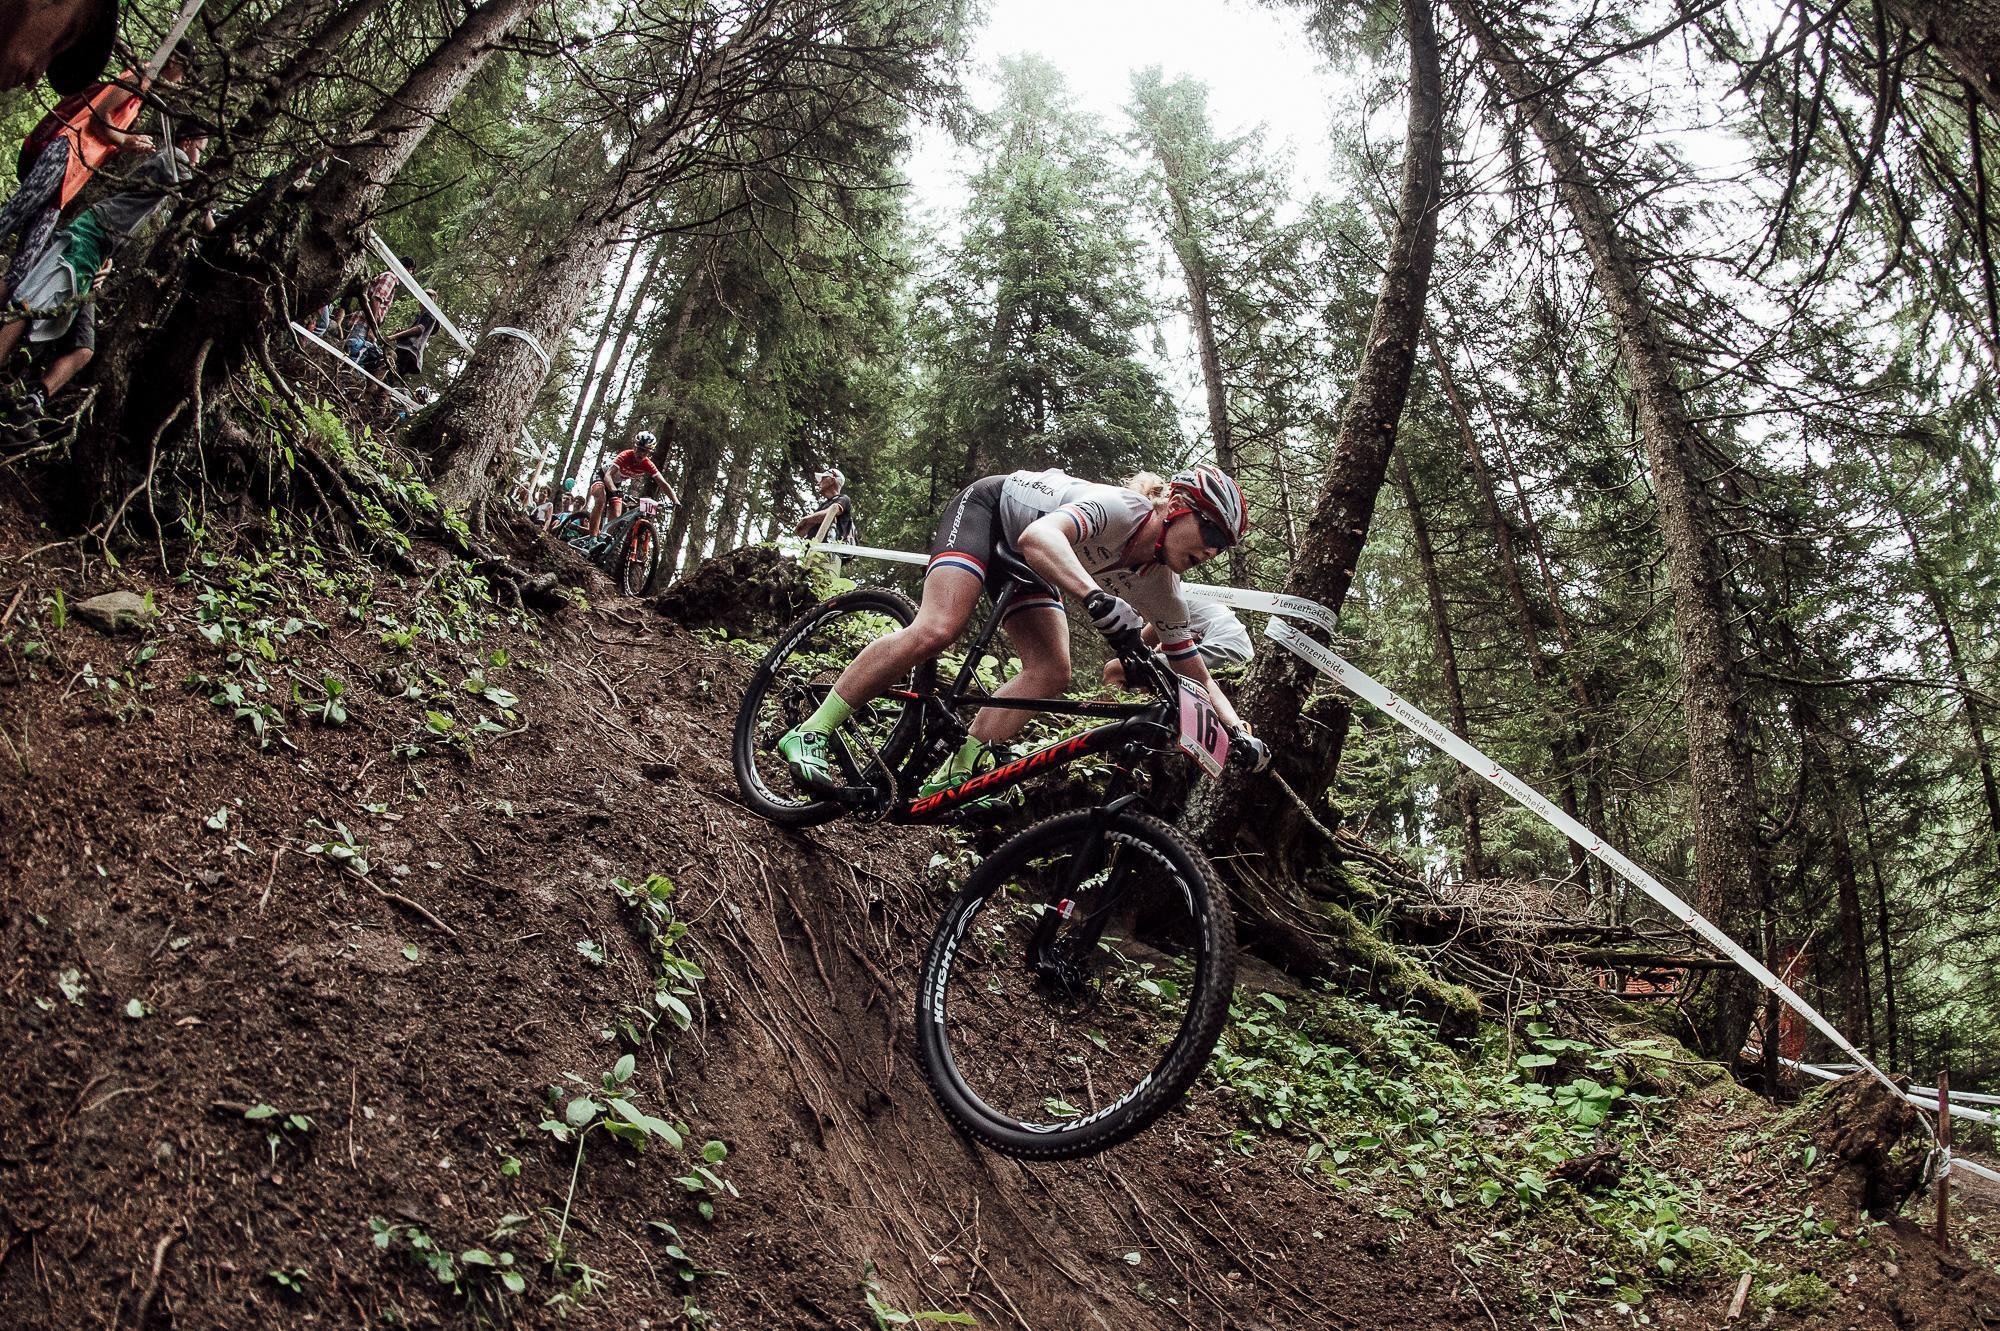 Uci Xco World Cup Rd 4 Lenzerheide Report And Replay 